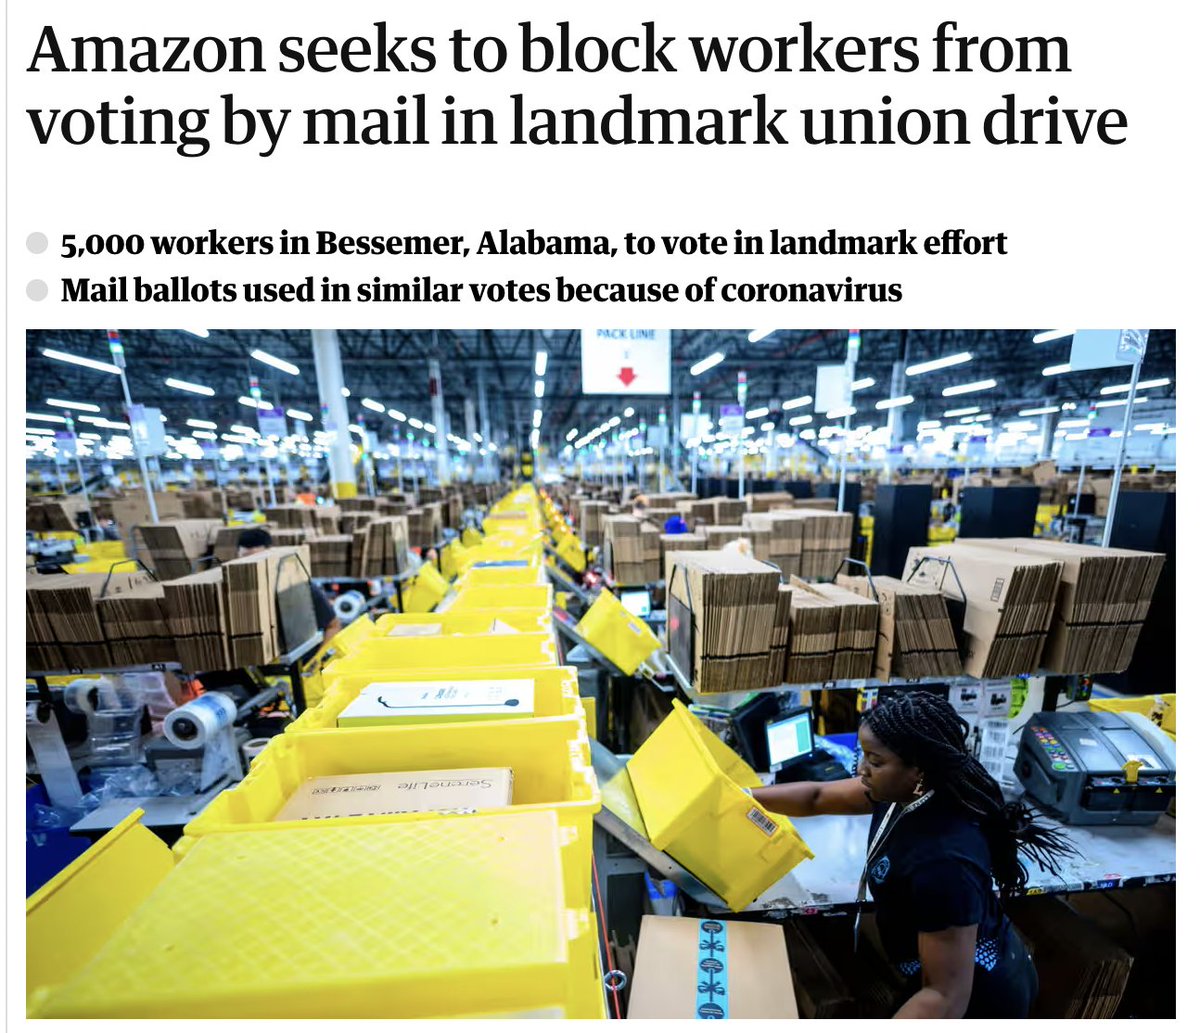 @KanekoaTheGreat These are just the few that have been caught. The tip of the iceberg. Bottom line is this; if mail in voting was not even safe enough for a corporate decision for Amazon, what makes people believe that it is safe to decide the future of a nation?